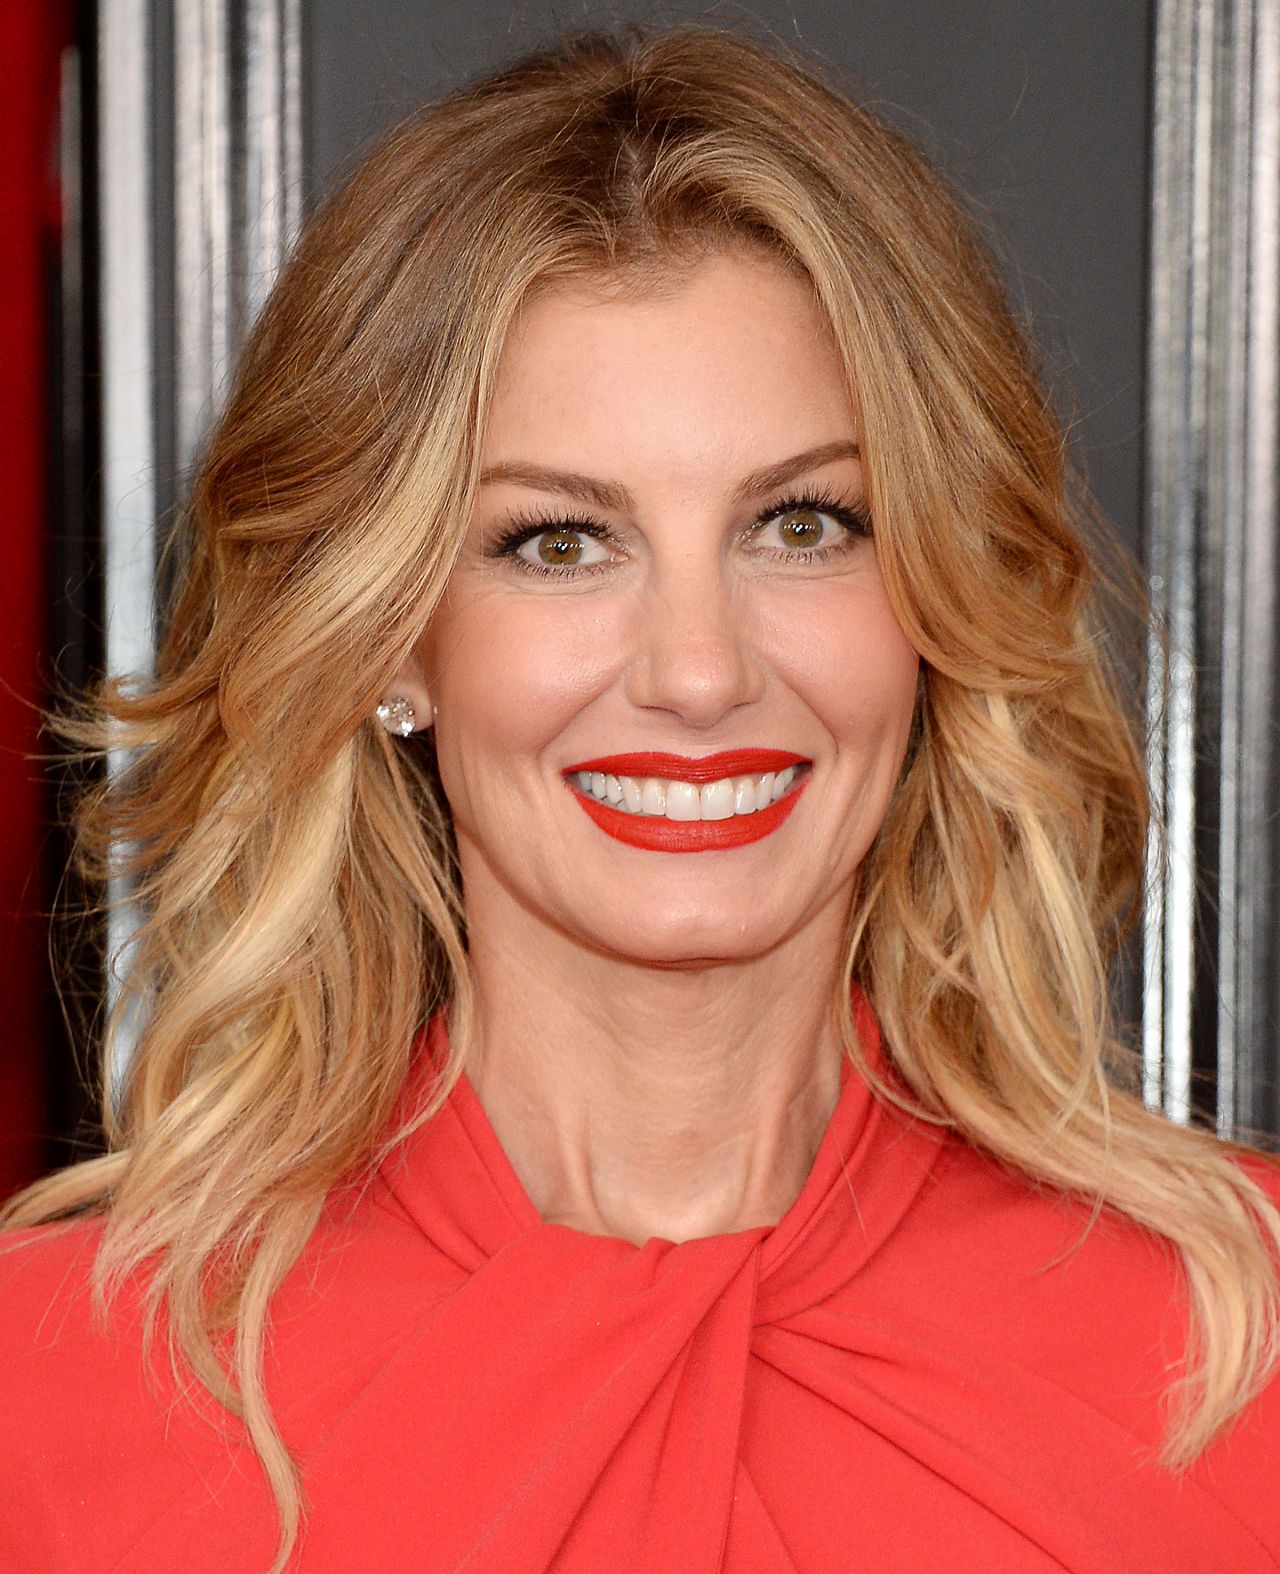 Collection 100+ Images recent pictures of faith hill Updated